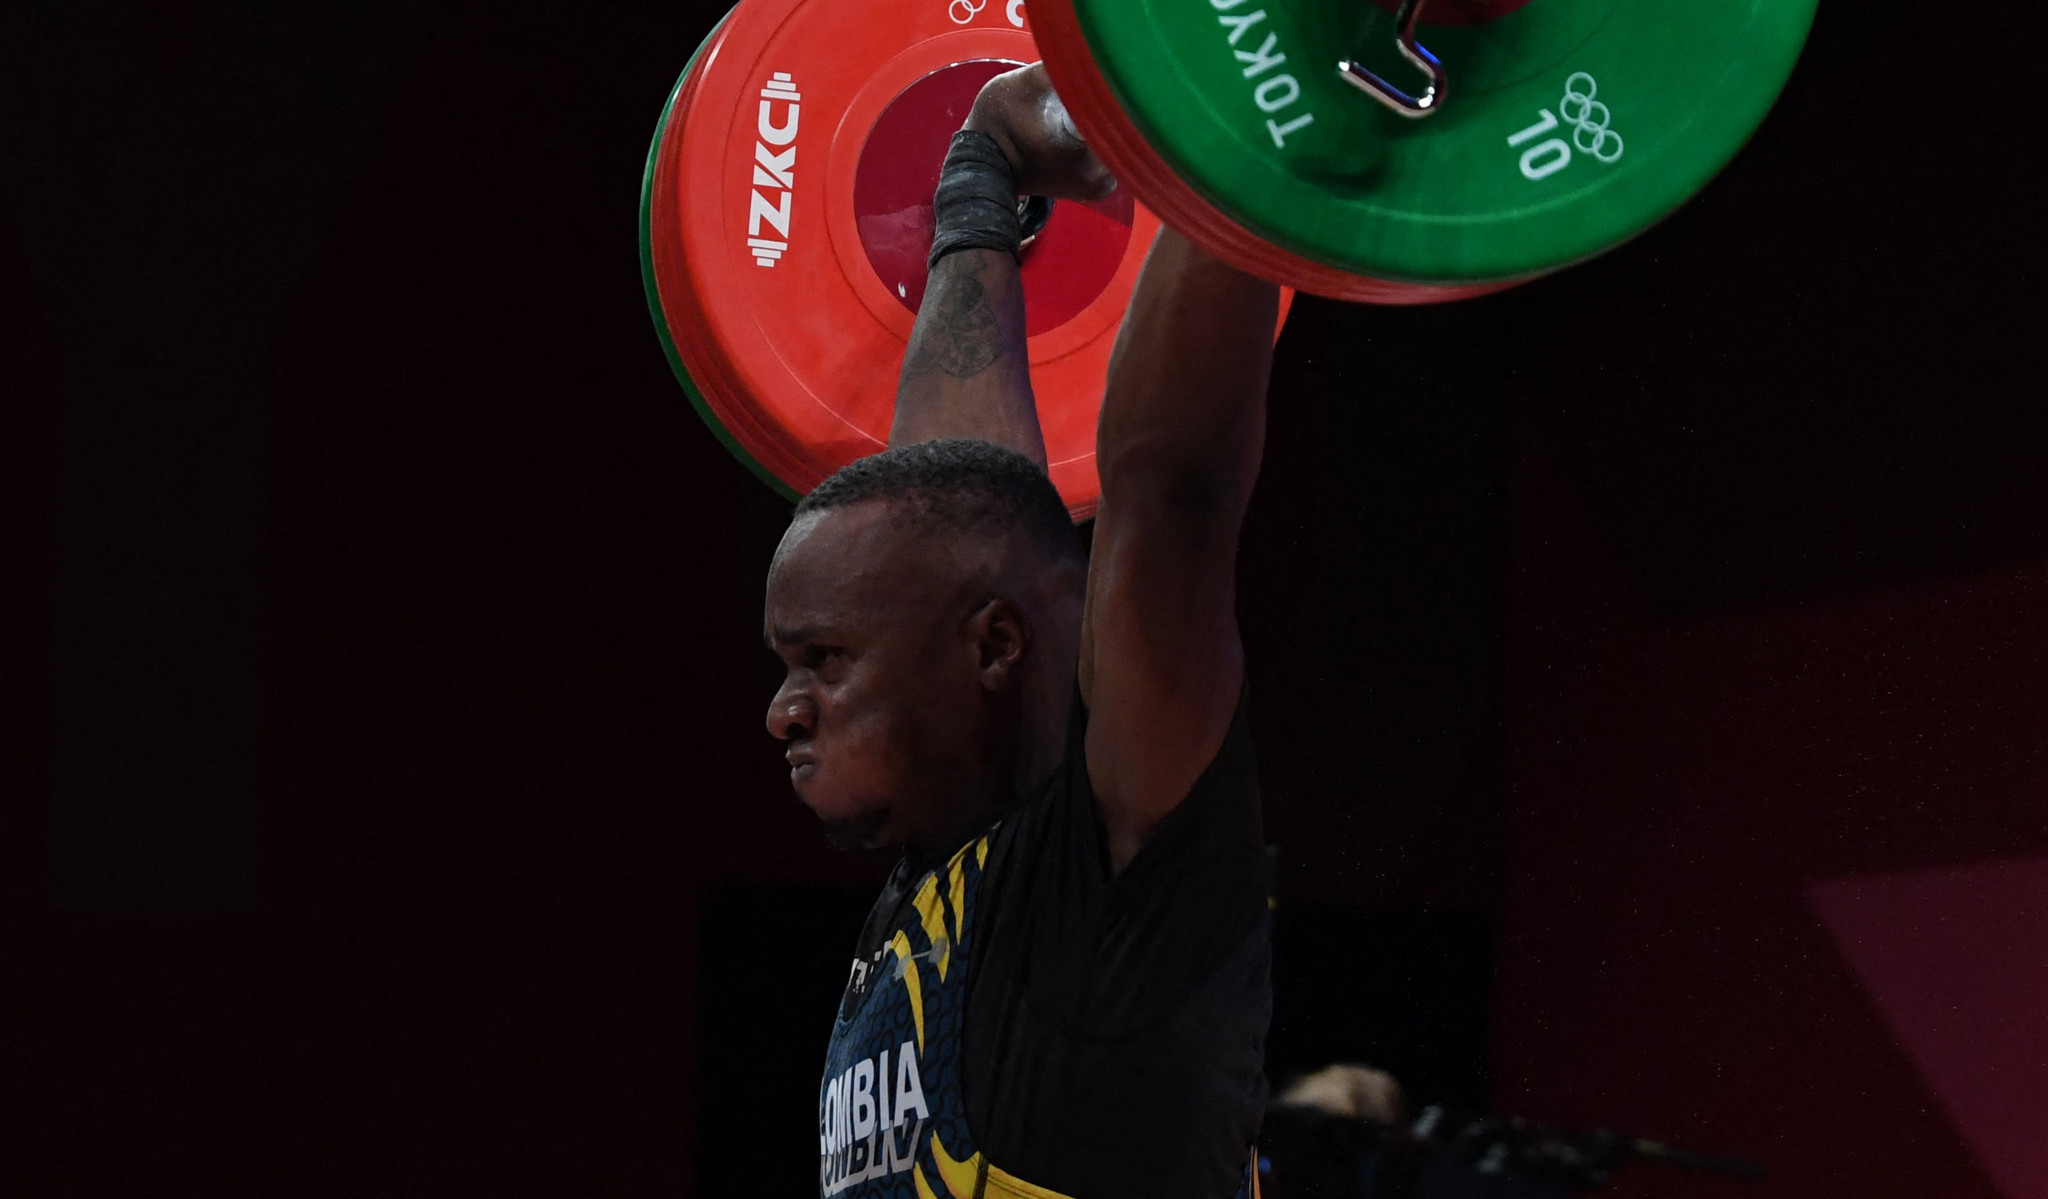 Records for Rodallegas as Colombia lead medals table at Pan American Weightlifting Championships